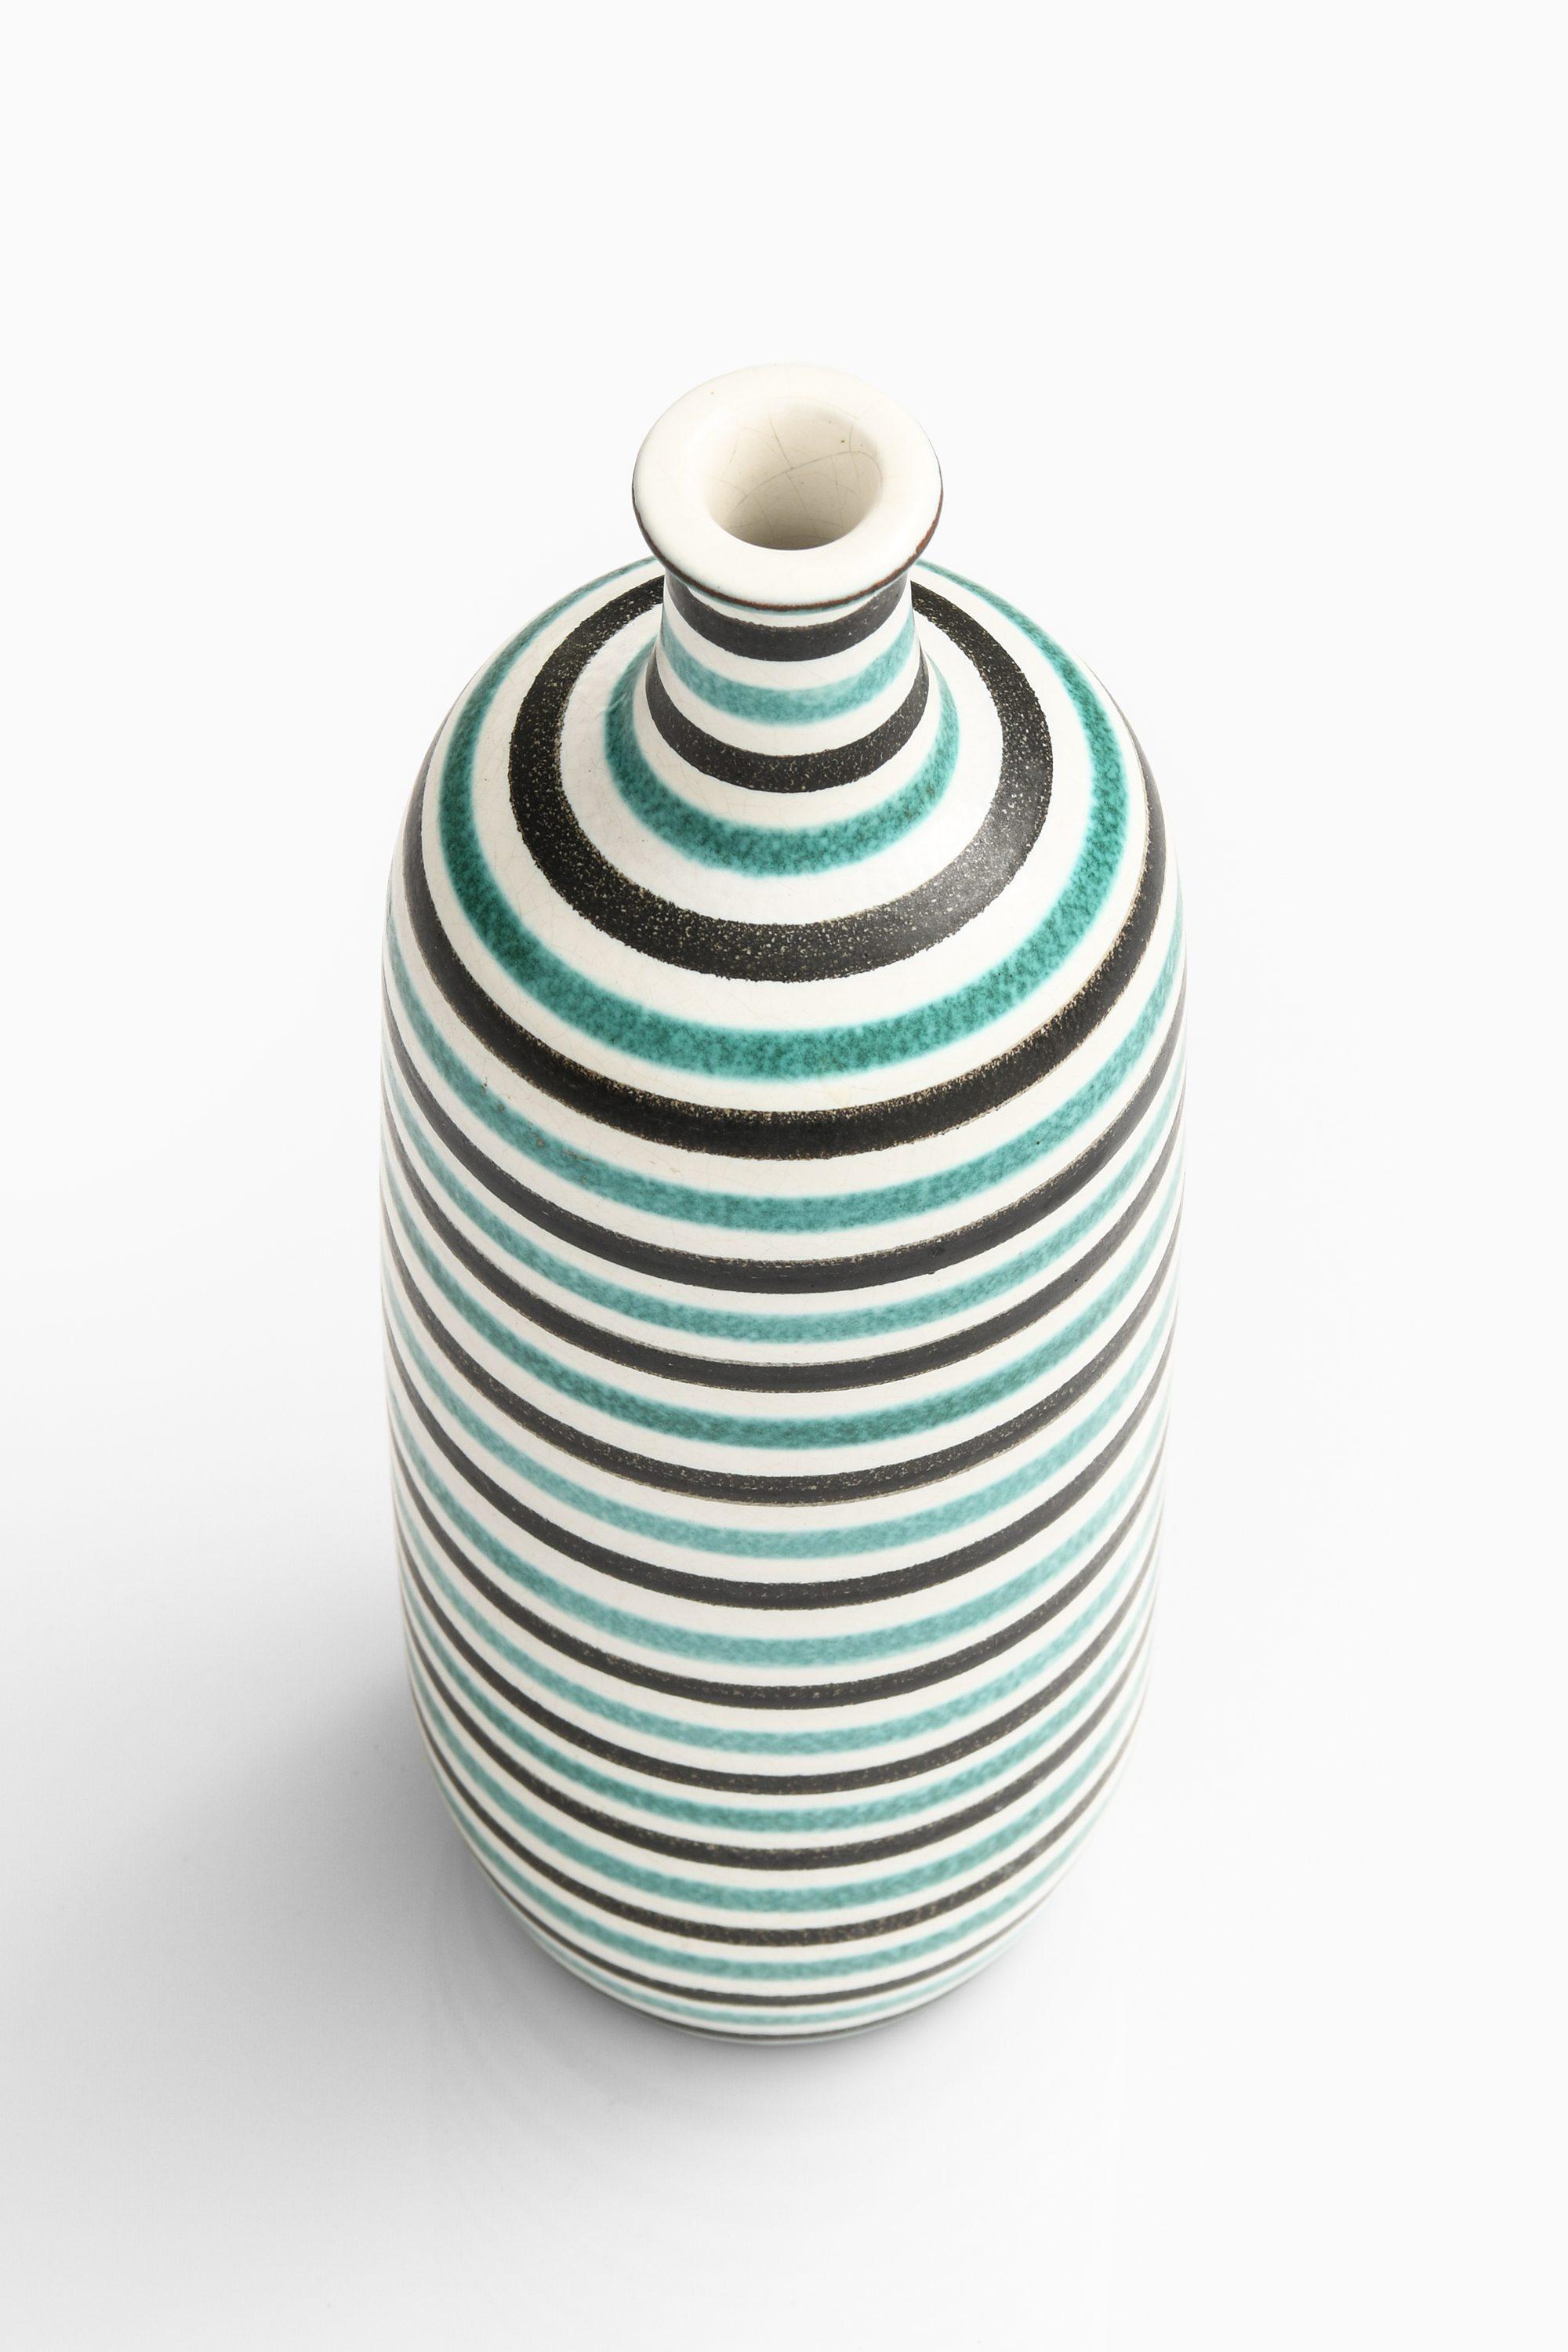 Rare Ceramic Vase in Blue by Stig Lindberg, 1950’s

Additional Information:
Material: Ceramic
Style: Mid century, Scandinavian
Produced by Gustavsberg in Sweden
Dimensions: (W x D x H): 10.5 x 10.5 x 30 cm
Condition: Good vintage condition, with